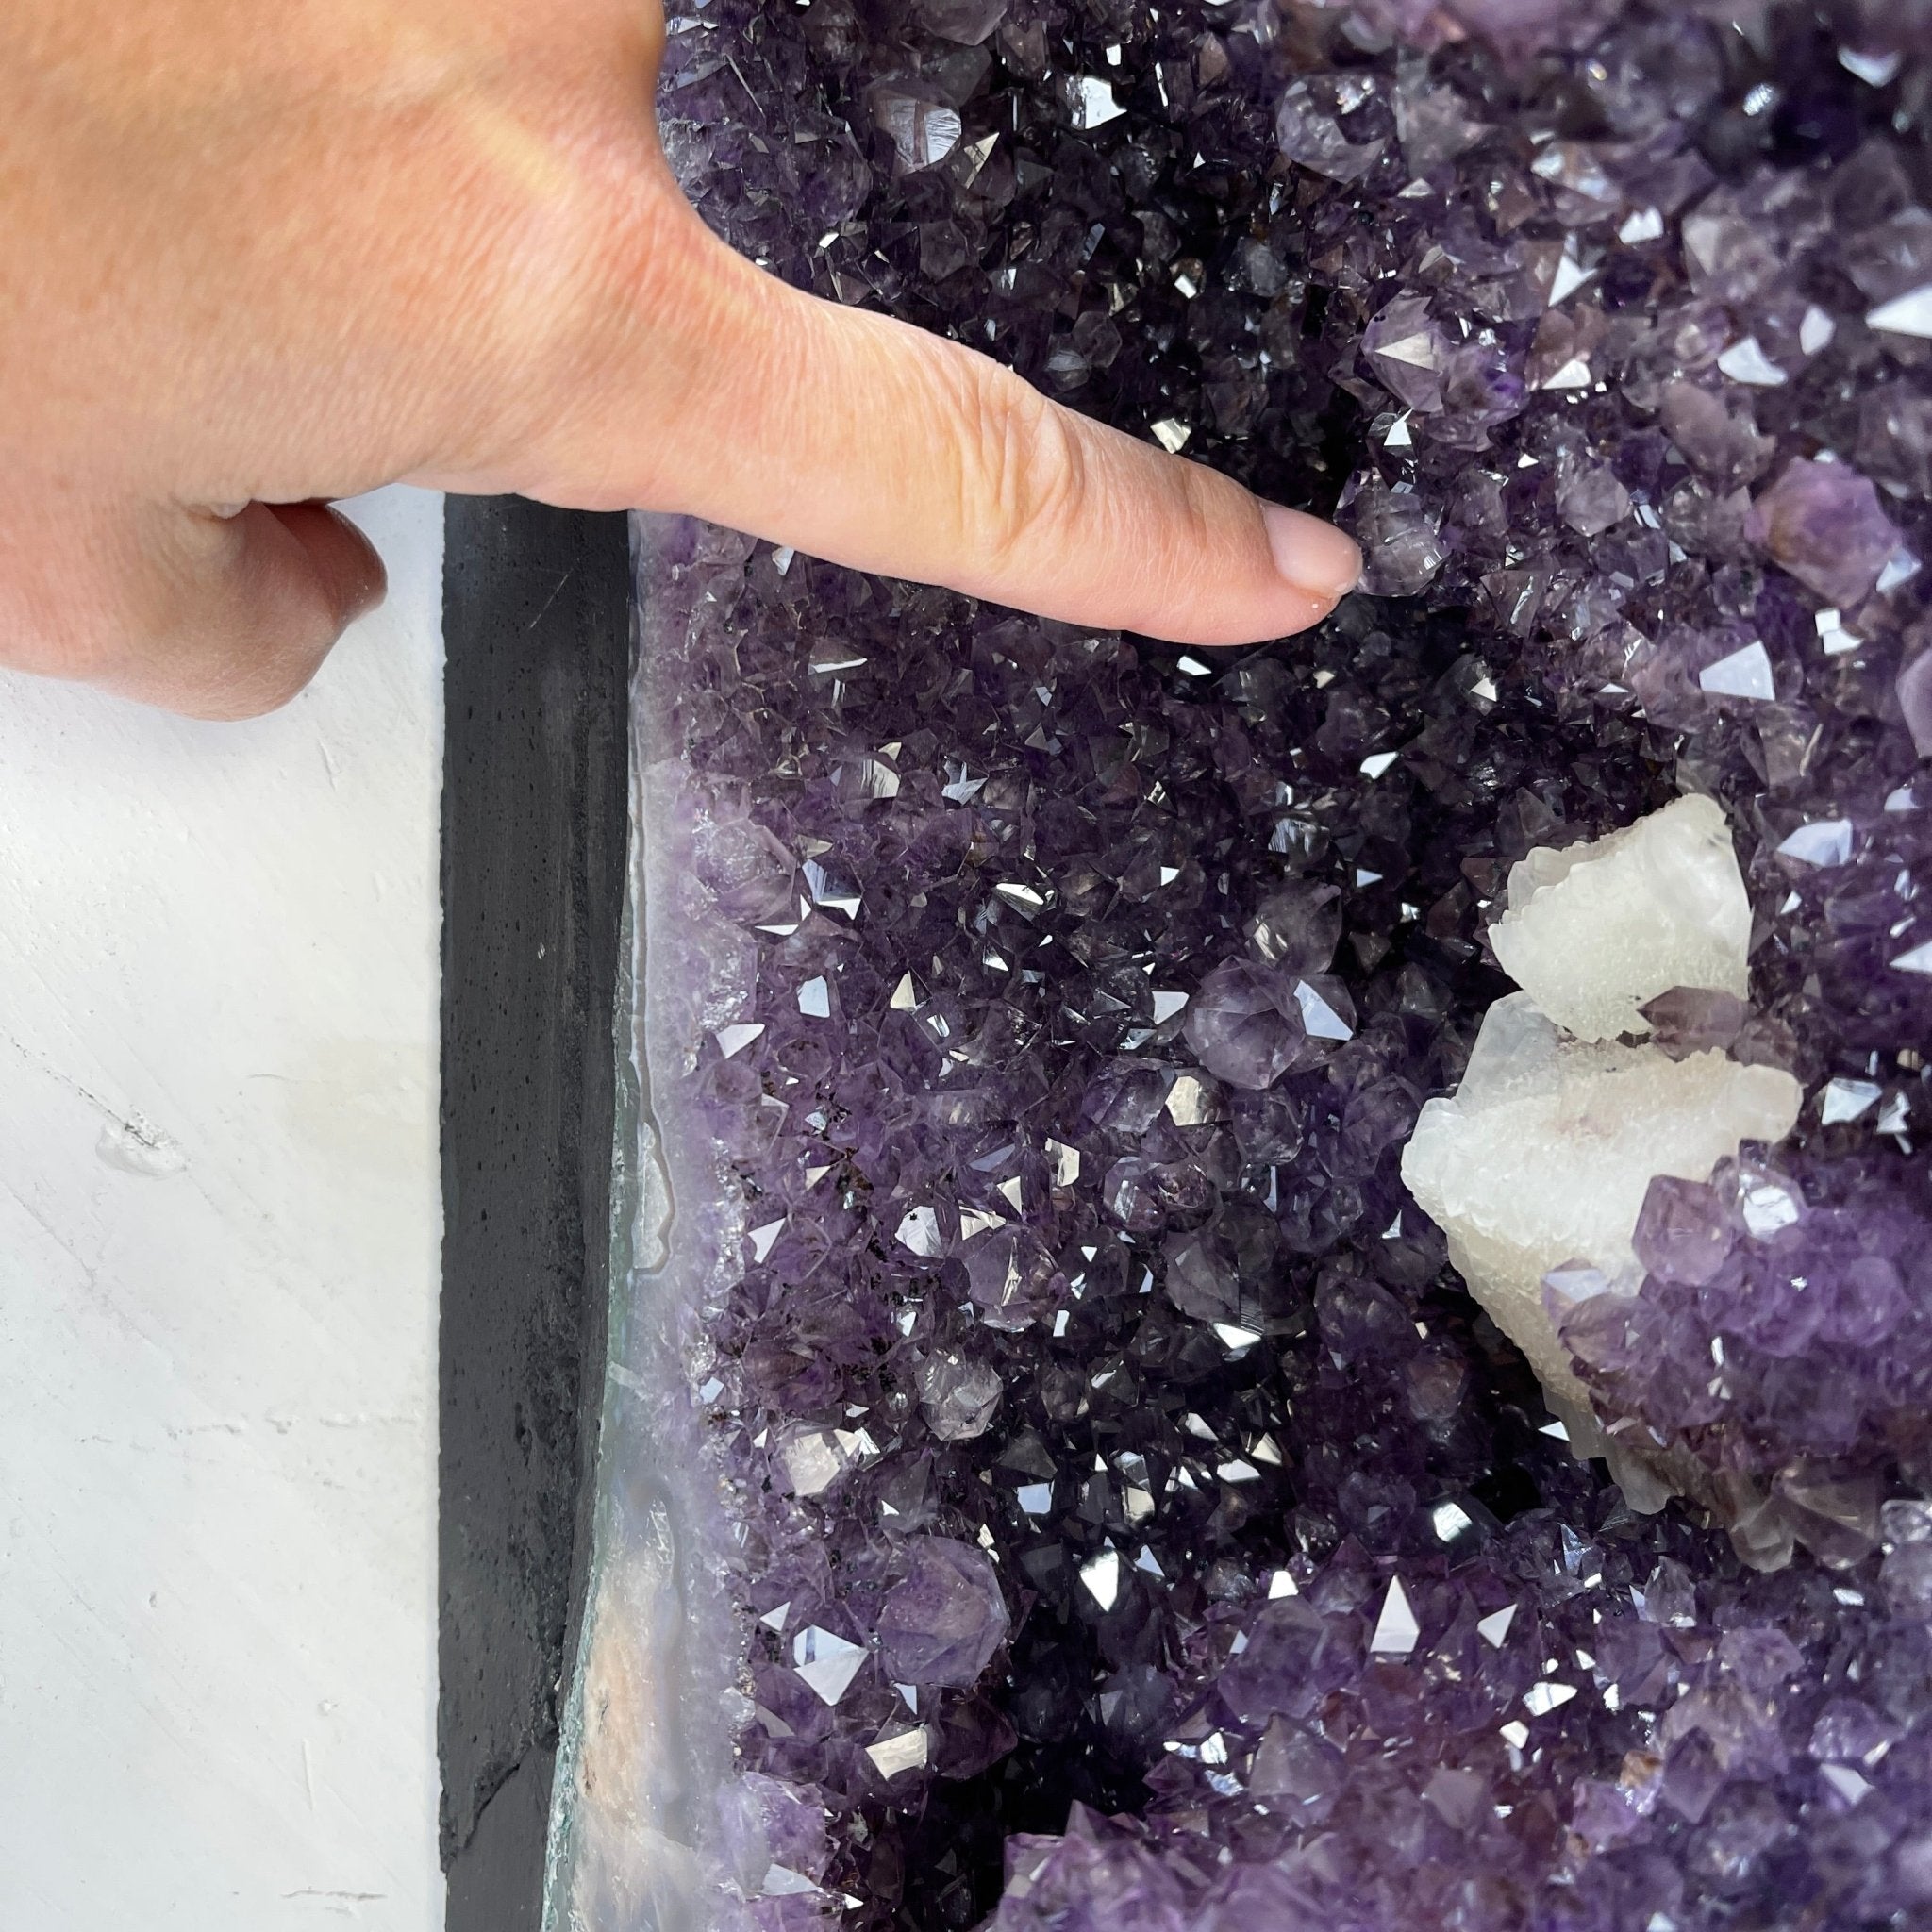 Extra Plus Quality Brazilian Amethyst Cathedral, 24.5 lbs & 12.1” tall Model #5601-1153 by Brazil Gems - Brazil GemsBrazil GemsExtra Plus Quality Brazilian Amethyst Cathedral, 24.5 lbs & 12.1” tall Model #5601-1153 by Brazil GemsCathedrals5601-1153